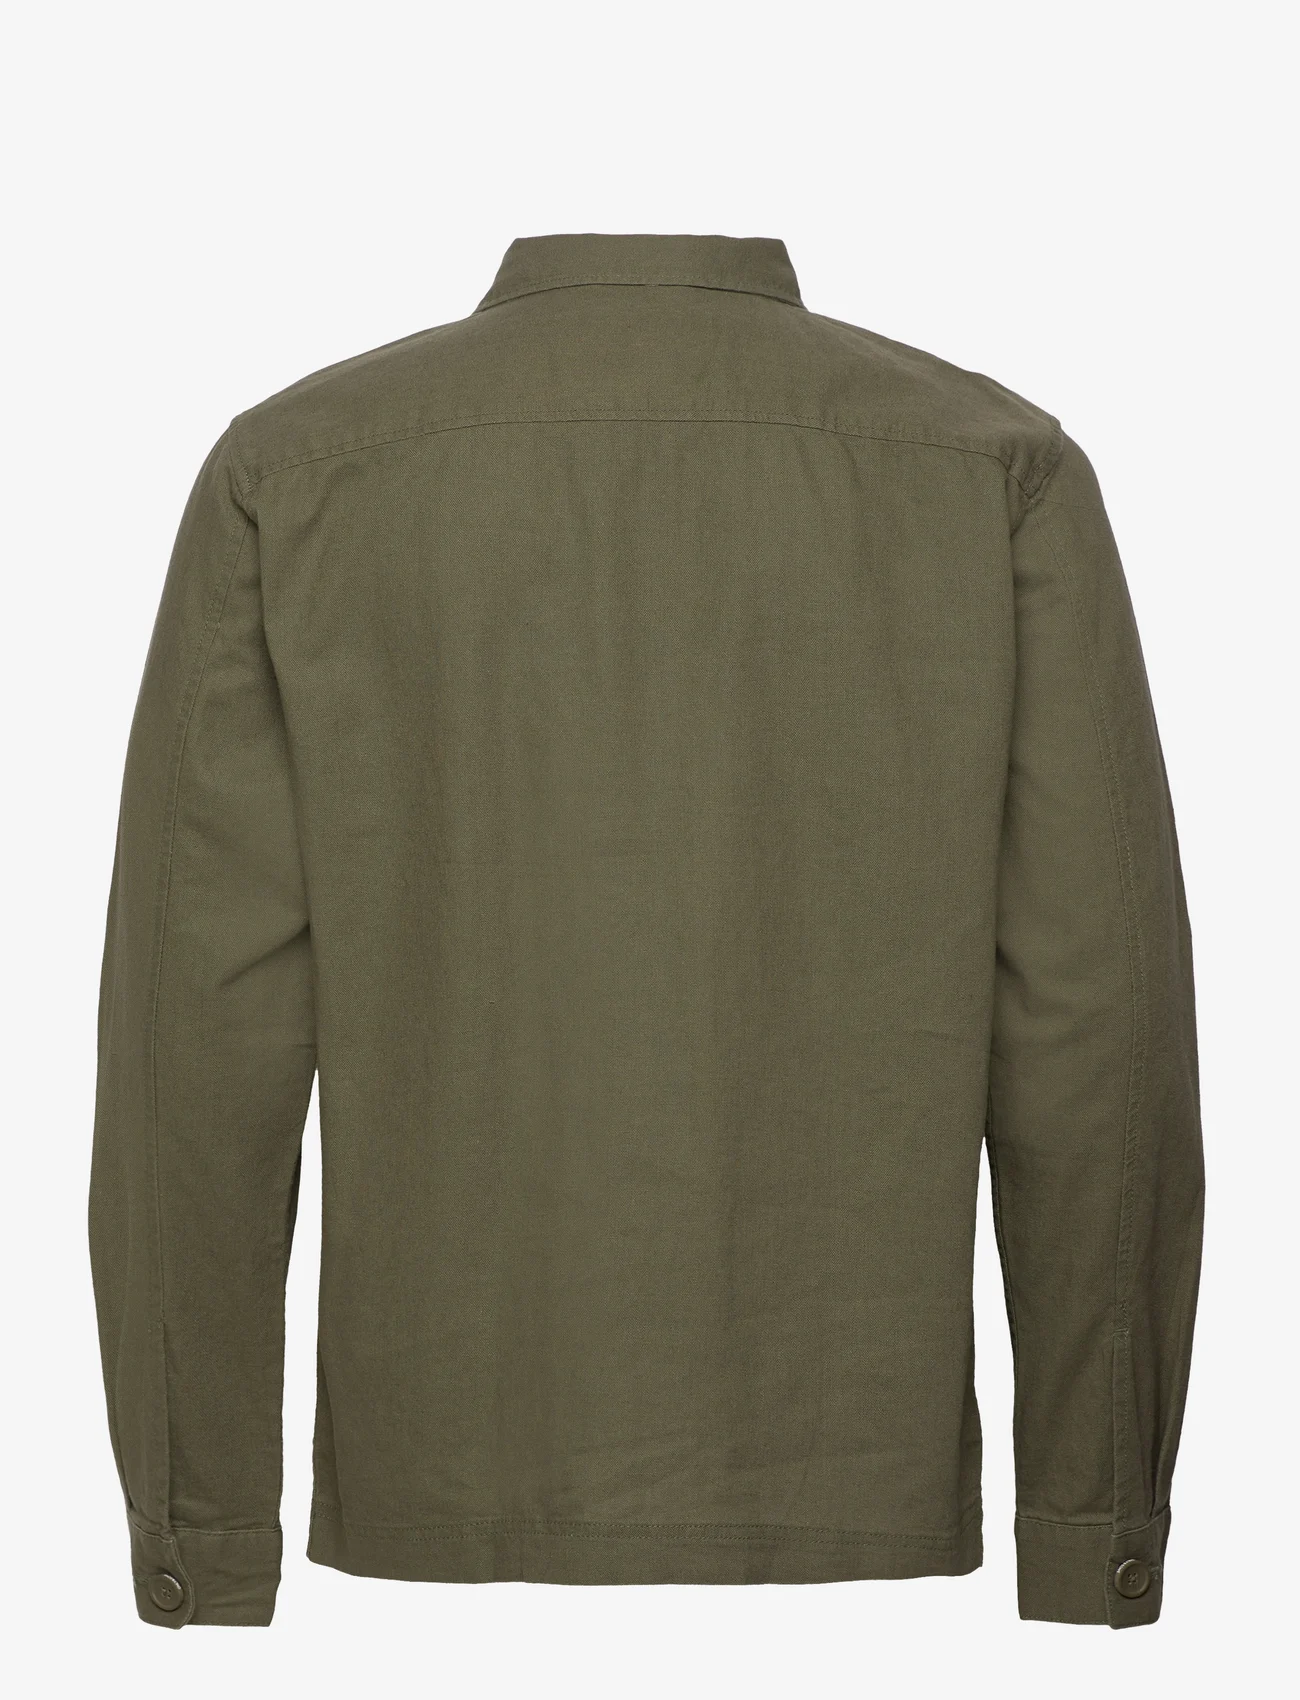 ONLY & SONS - ONSKIER 0019 COT LIN OVERSHIRT - menn - olive night - 1